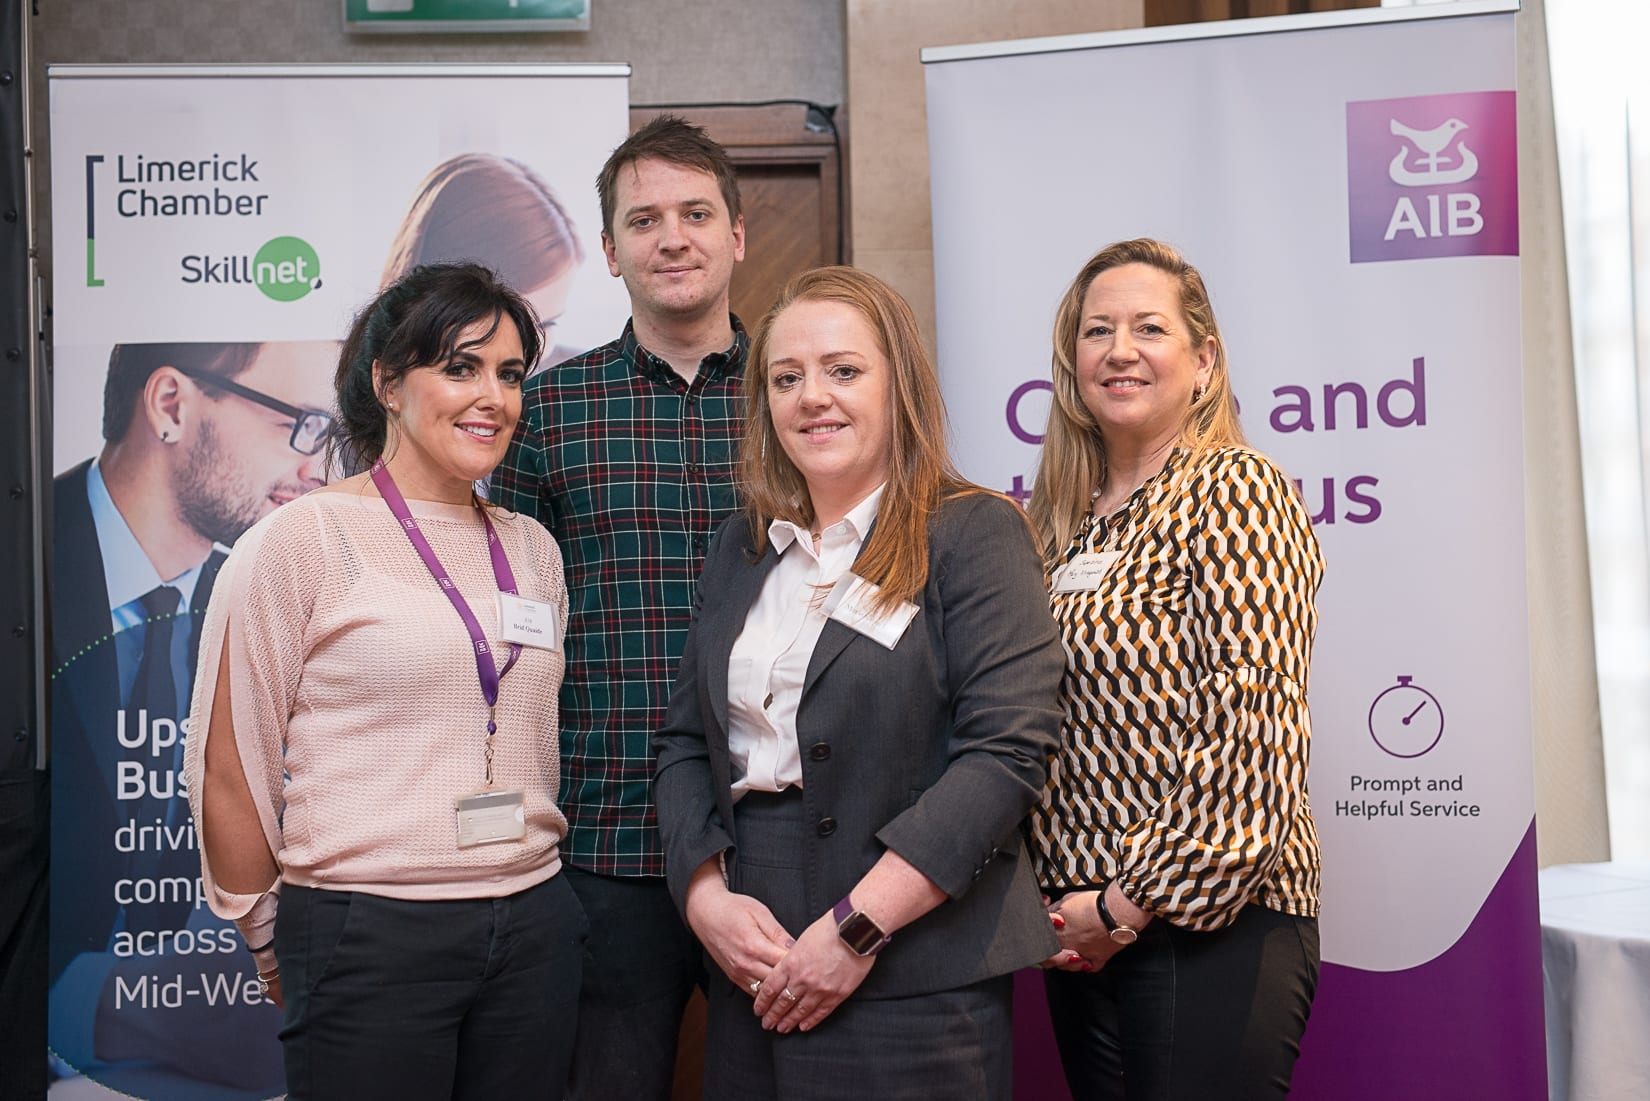 No repro fee- At the Limerick Chamber business briefing on ‘Spending Trends: Tourism, Retail &  Hospitality Industry Insights & Marketing Trends’ at the Savoy Hotel  - 22-01-2019, From Left to Right: Bríd Quaide - AIB, Scott Fitzgerald- Superbites Takeaway, Marie Kennelly - AIB, Mary Fitzgerald- Superbites Takeaway. 
Photo credit Shauna Kennedy